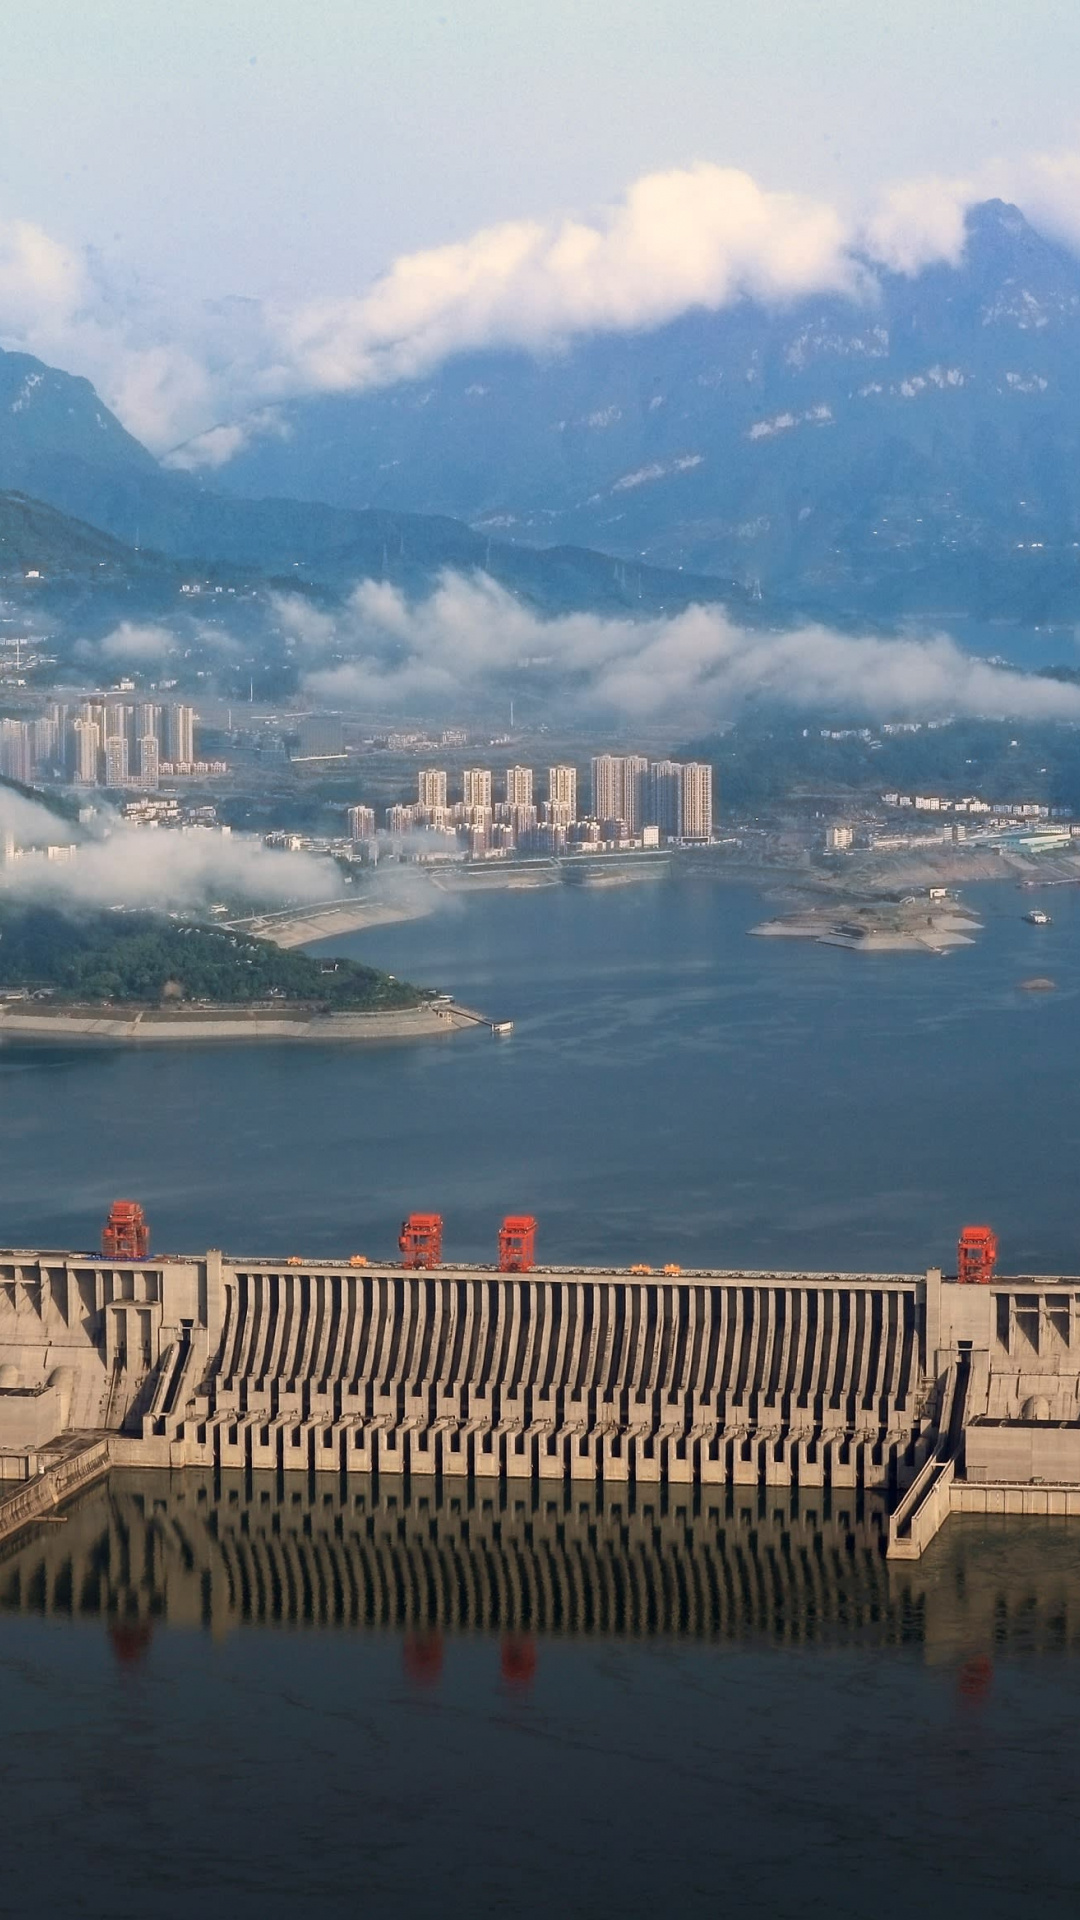 Three Gorges, Chinese landmark, Hydro power projects, Wallpaper collection, 1080x1920 Full HD Handy